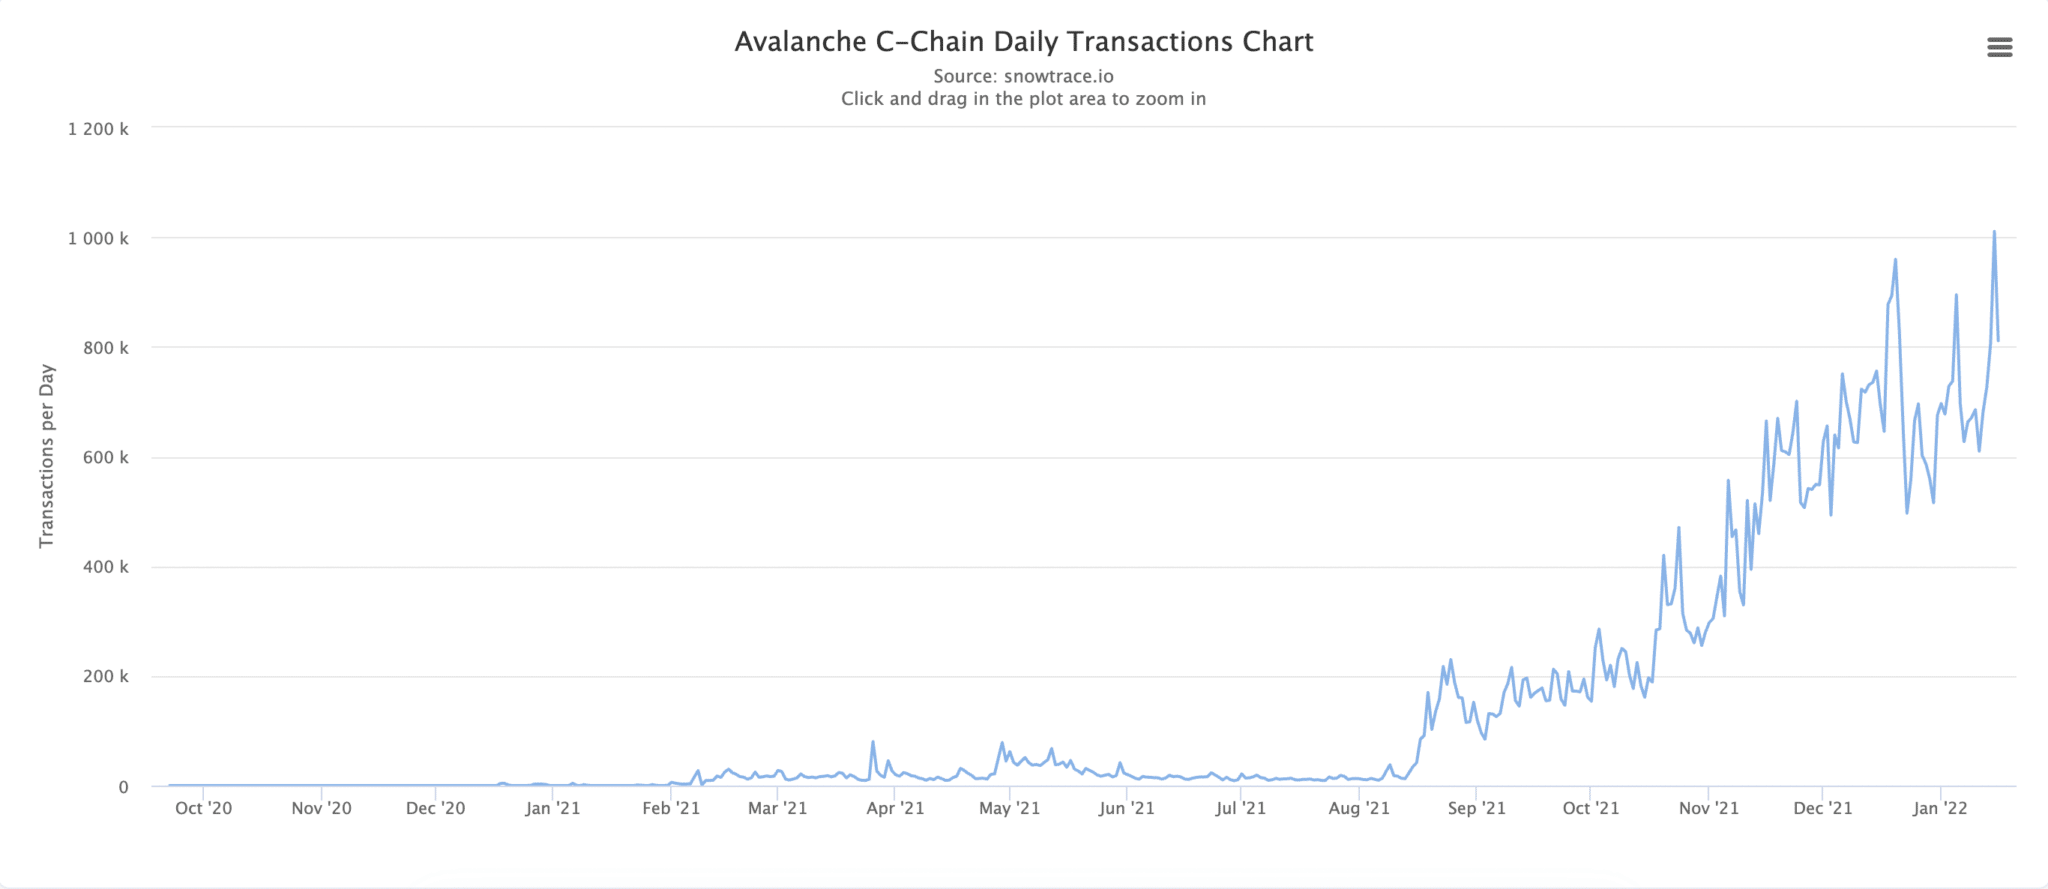 Avalanche C-Chain Daily Transactions (Fonte: snowtrace.io)